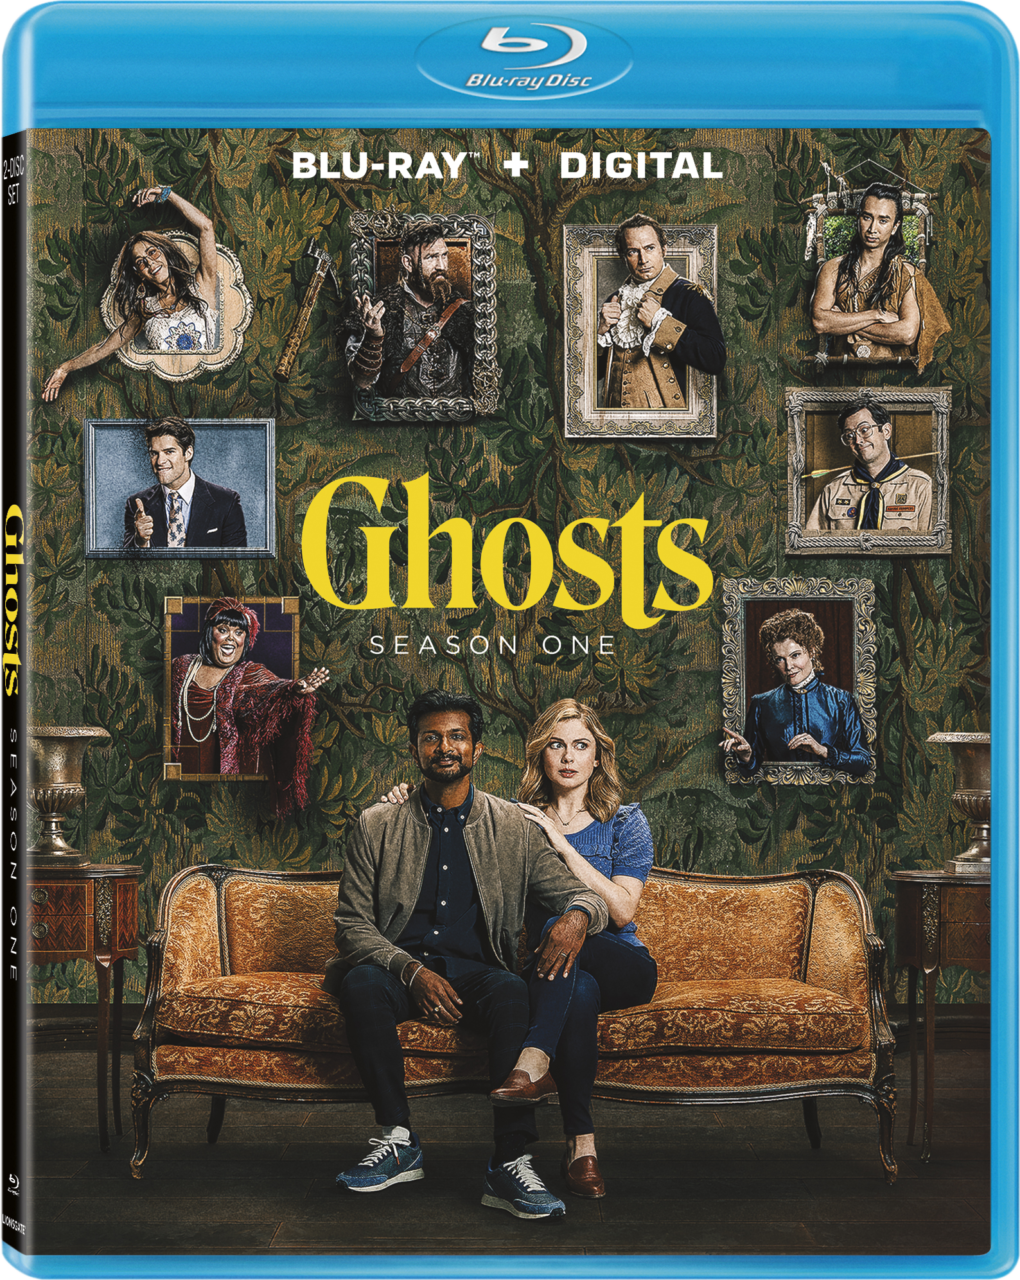 Ghosts Season One Blu-Ray Combo pack cover (Lionsgate/CBS)